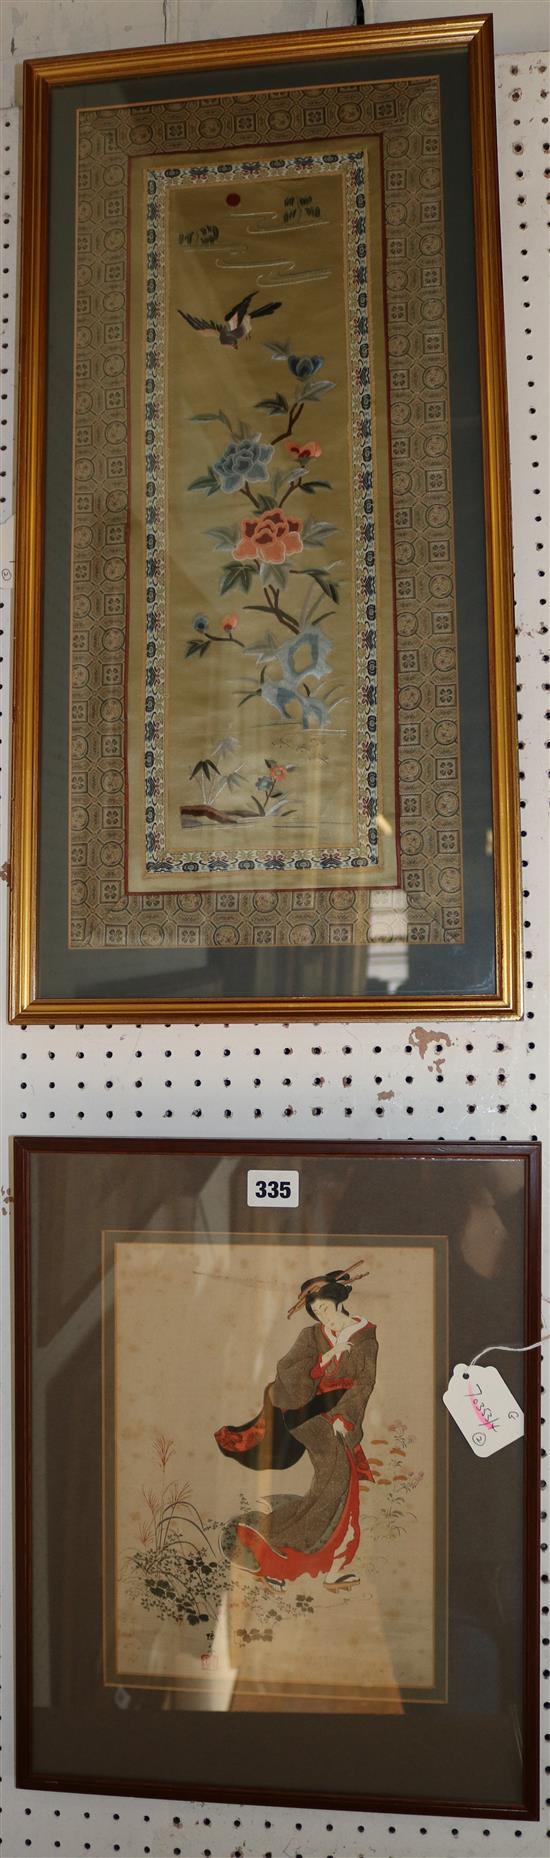 Chinese embroidered silk panel with brocade border & a Japanese woodblock print of a geisha